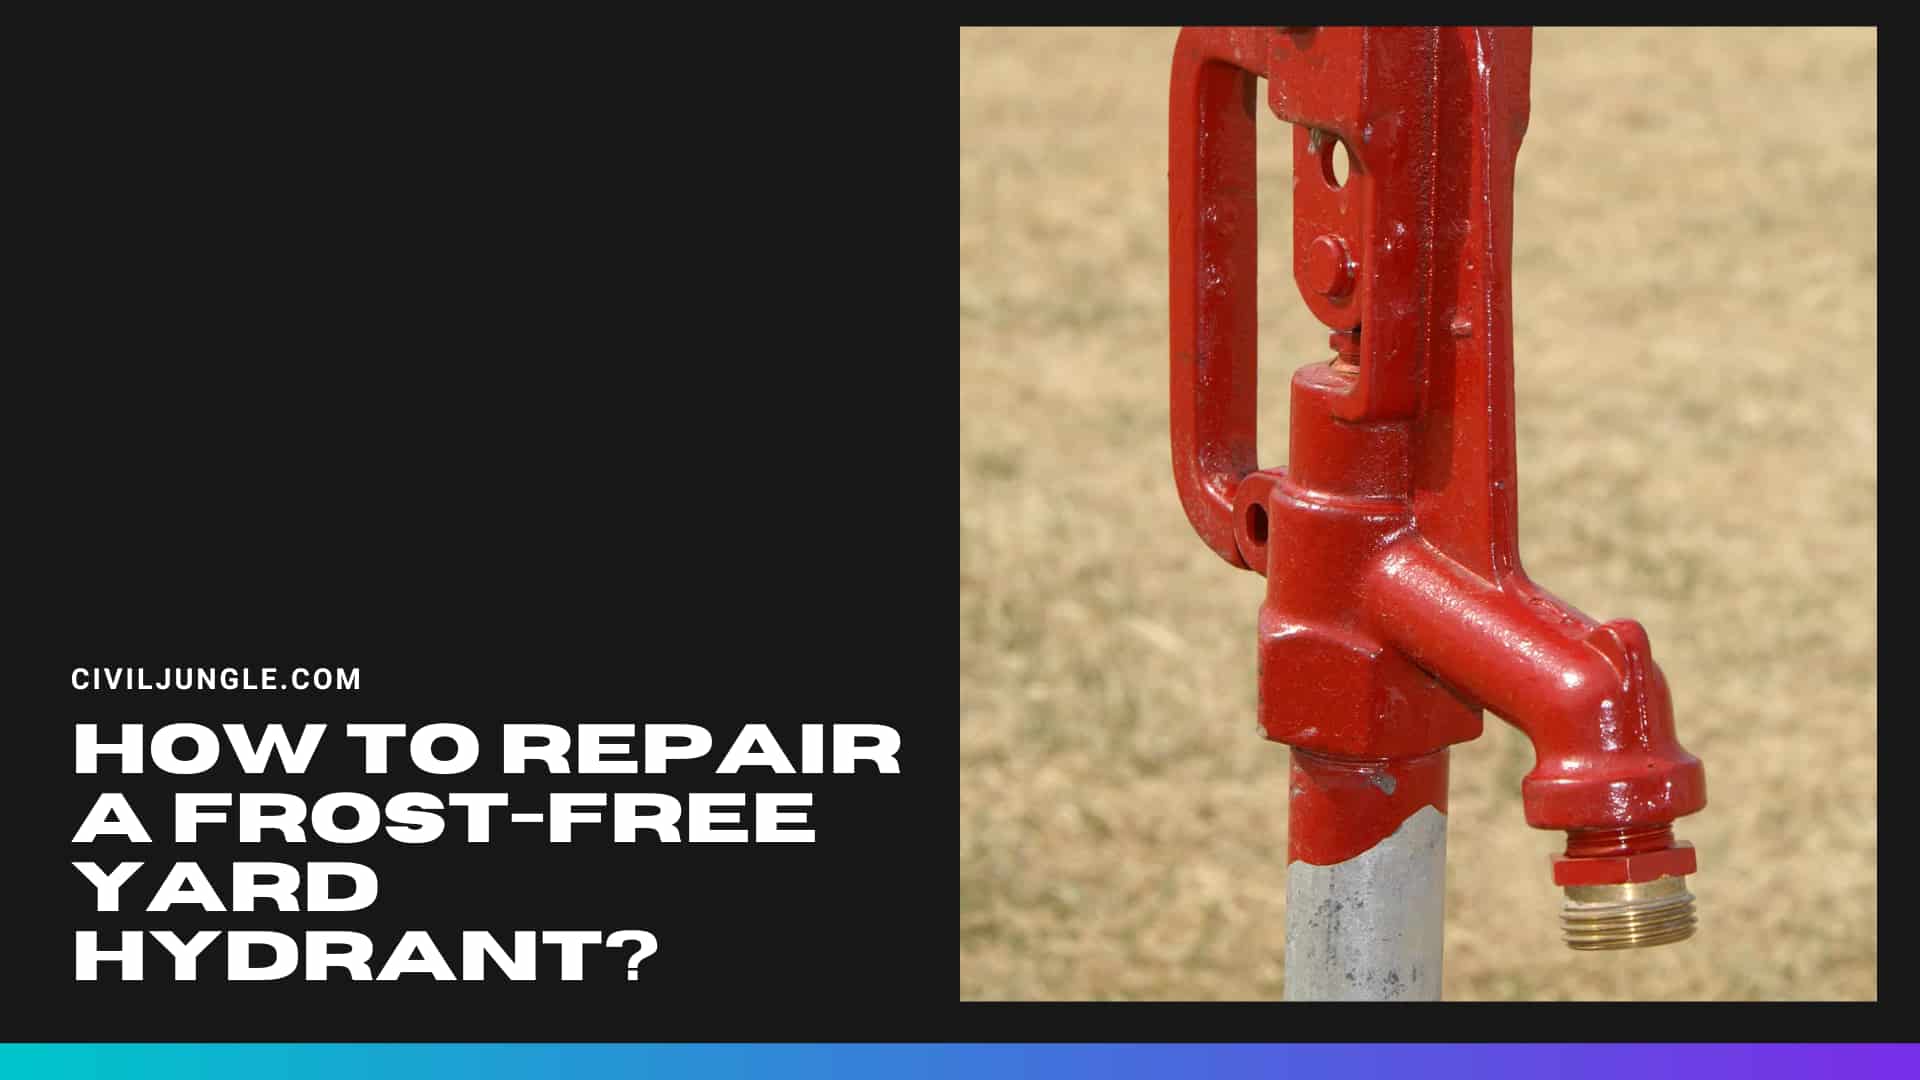 How to Repair a Frost-Free Yard Hydrant?